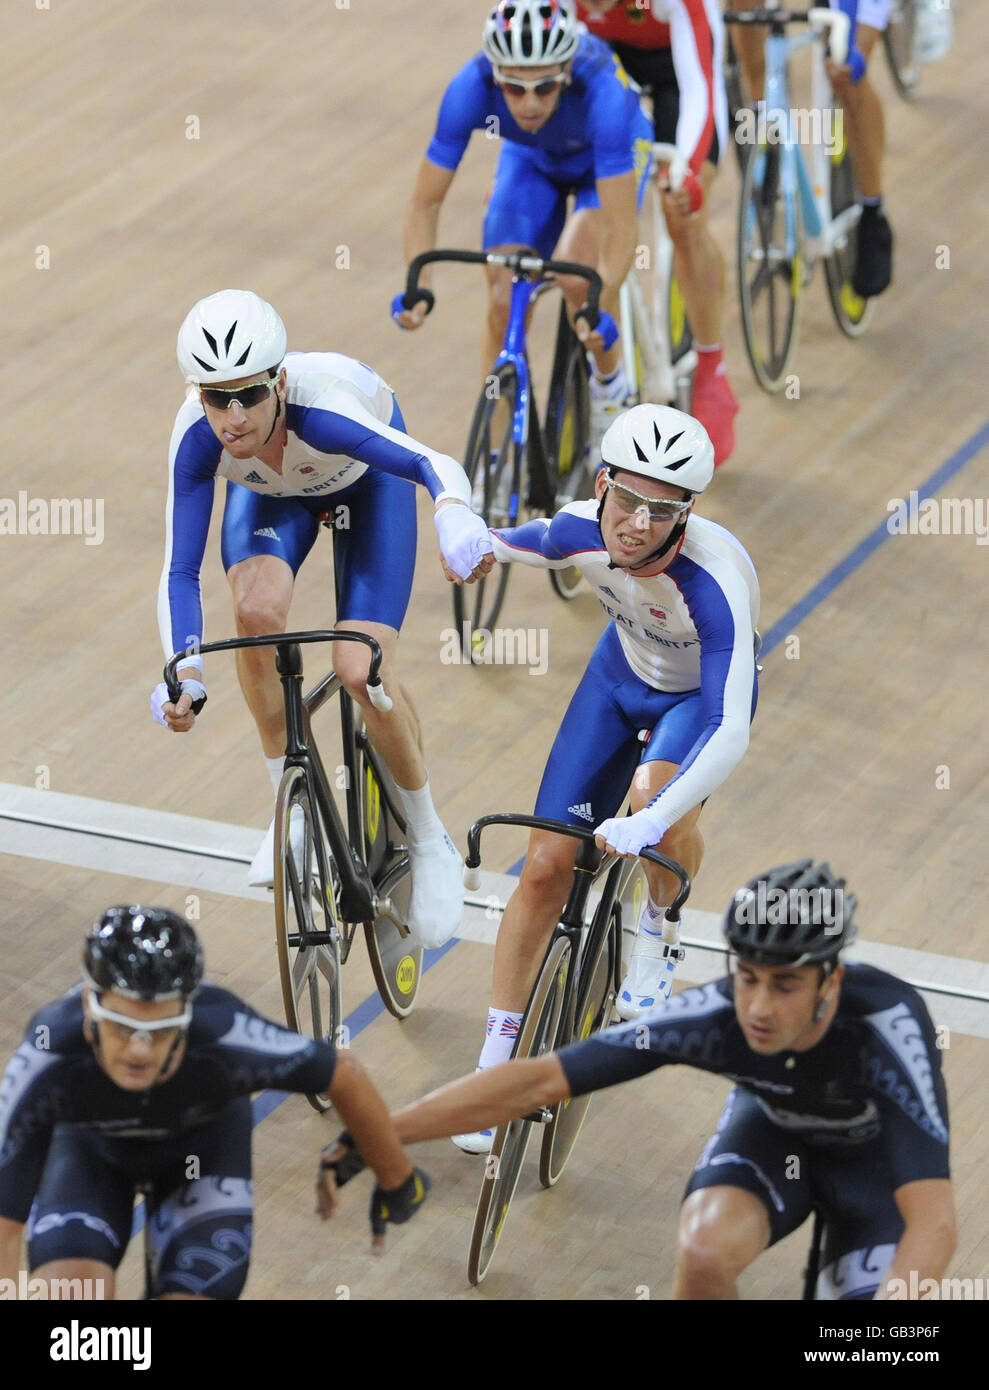 Great Britain's Bradley Wiggins (left) and Mark Cavendish in the Men's Madison final at the Laoshan Velodrome at the 2008 Beijing Olympic Games in China. Stock Photo